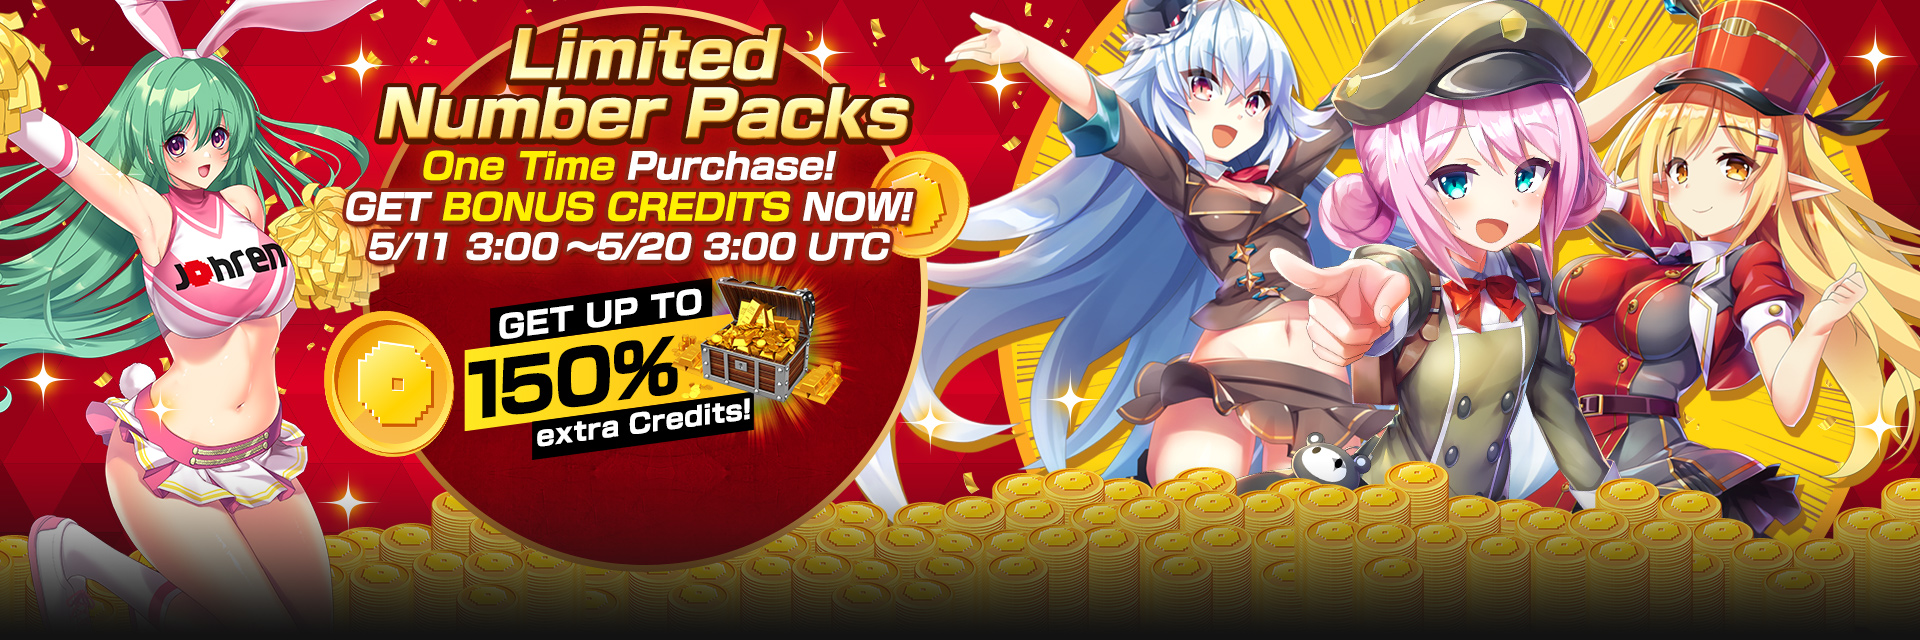 Get up to 150% extra Credits!